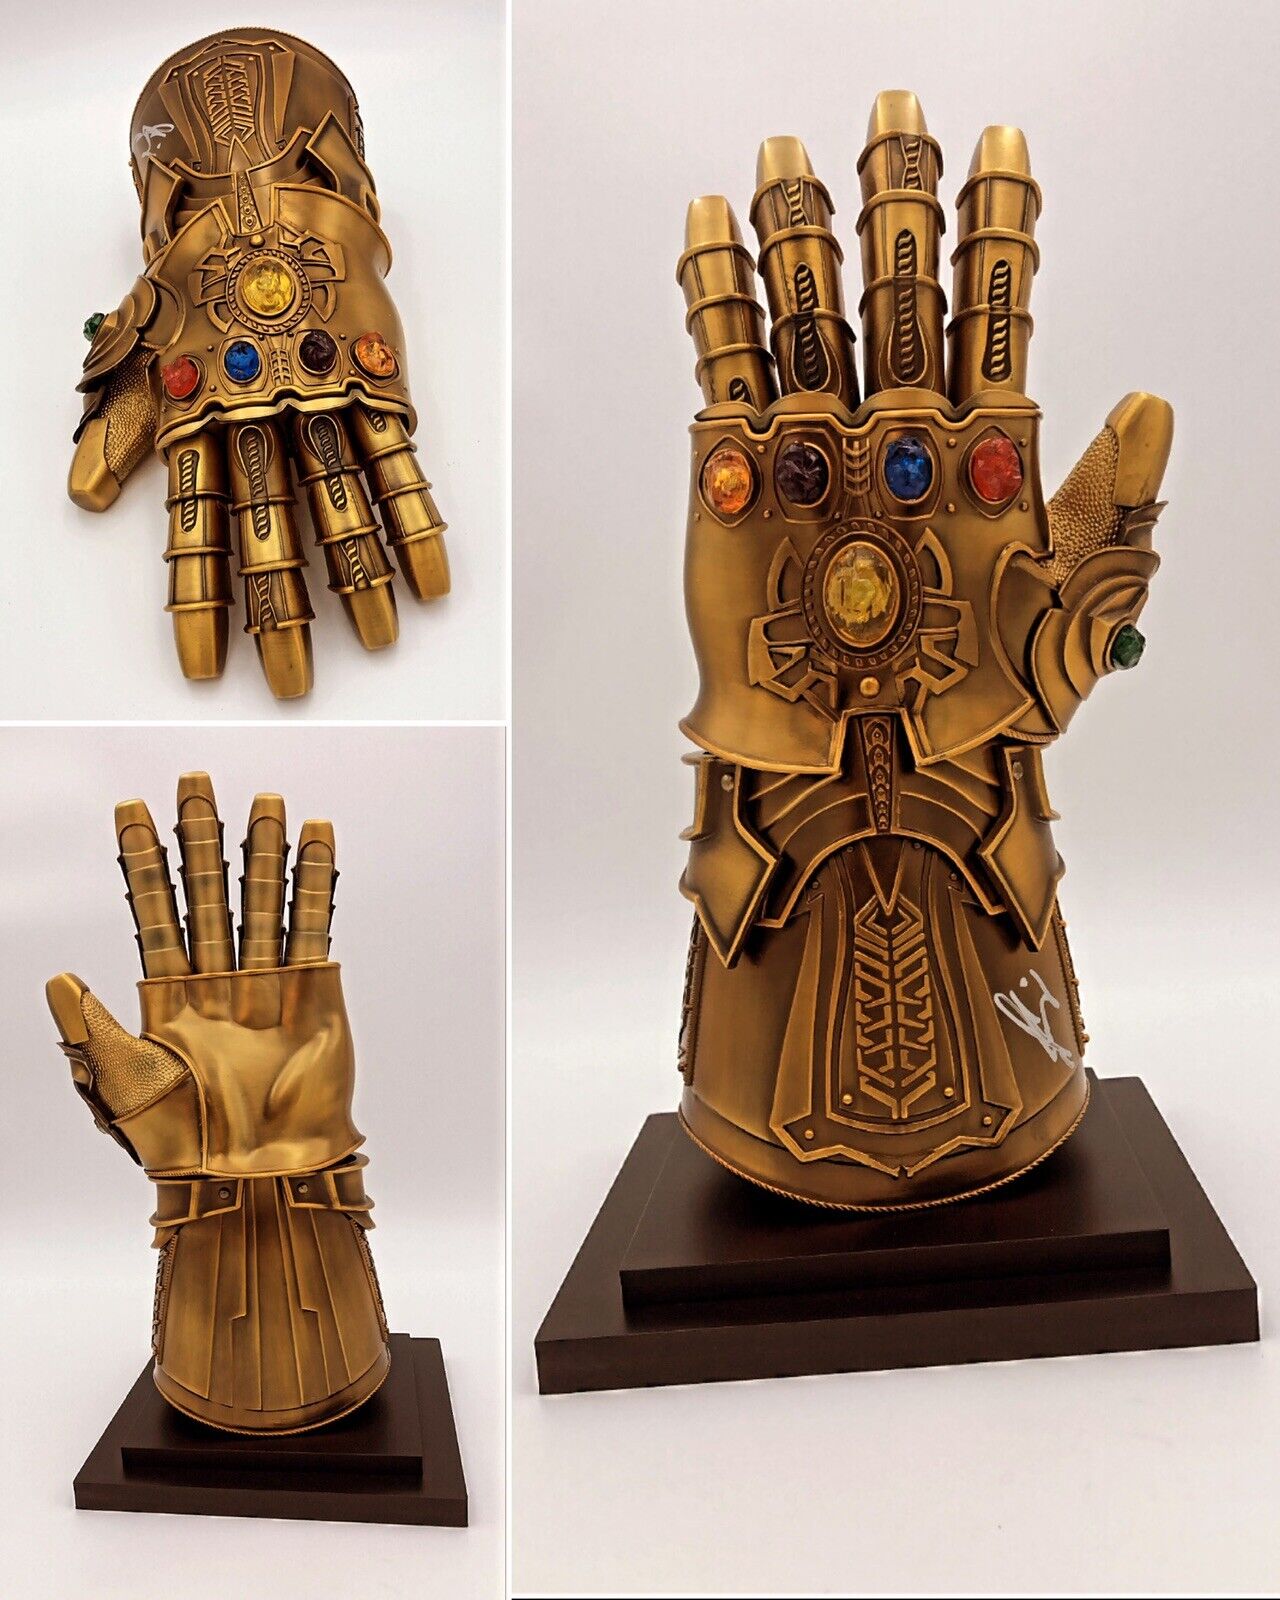 Josh Brolin signed Thanos Infinity Gauntlet Avengers End Game movie replica prop